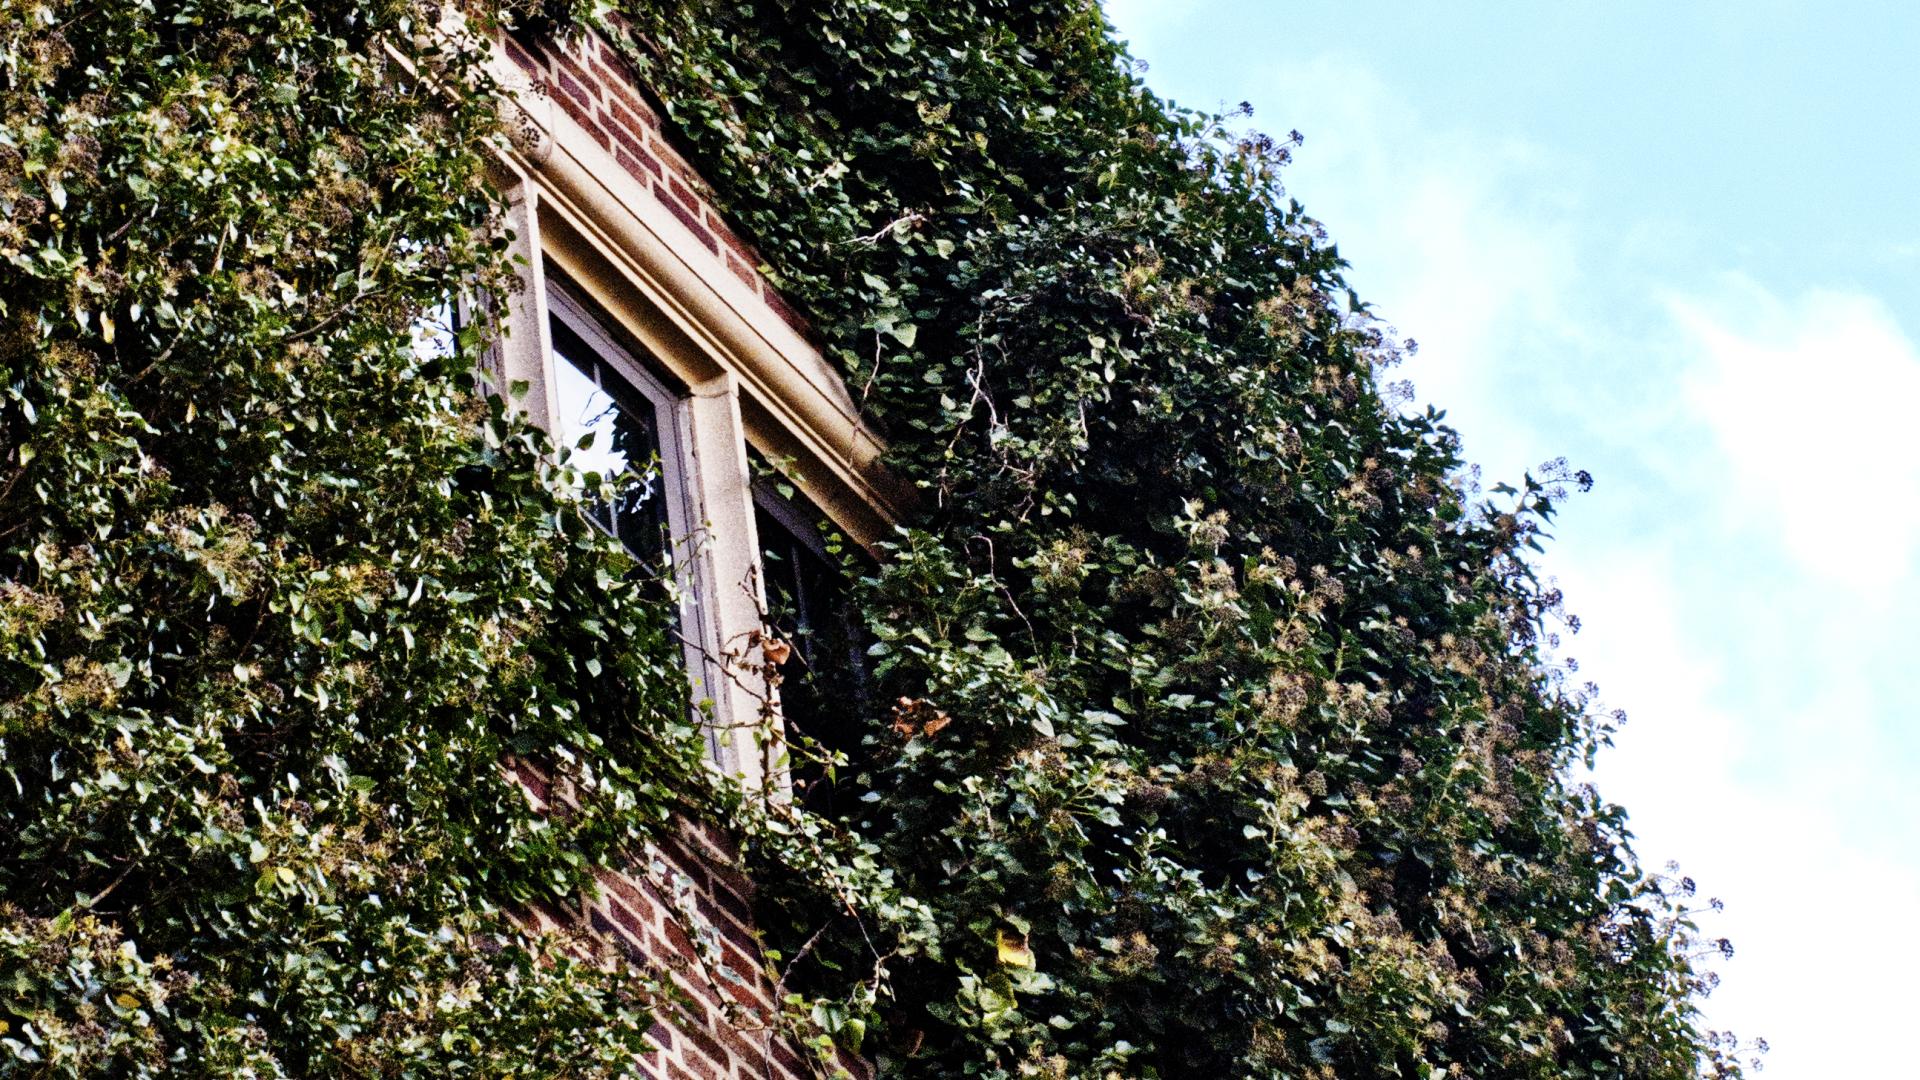 Ivy wall with window